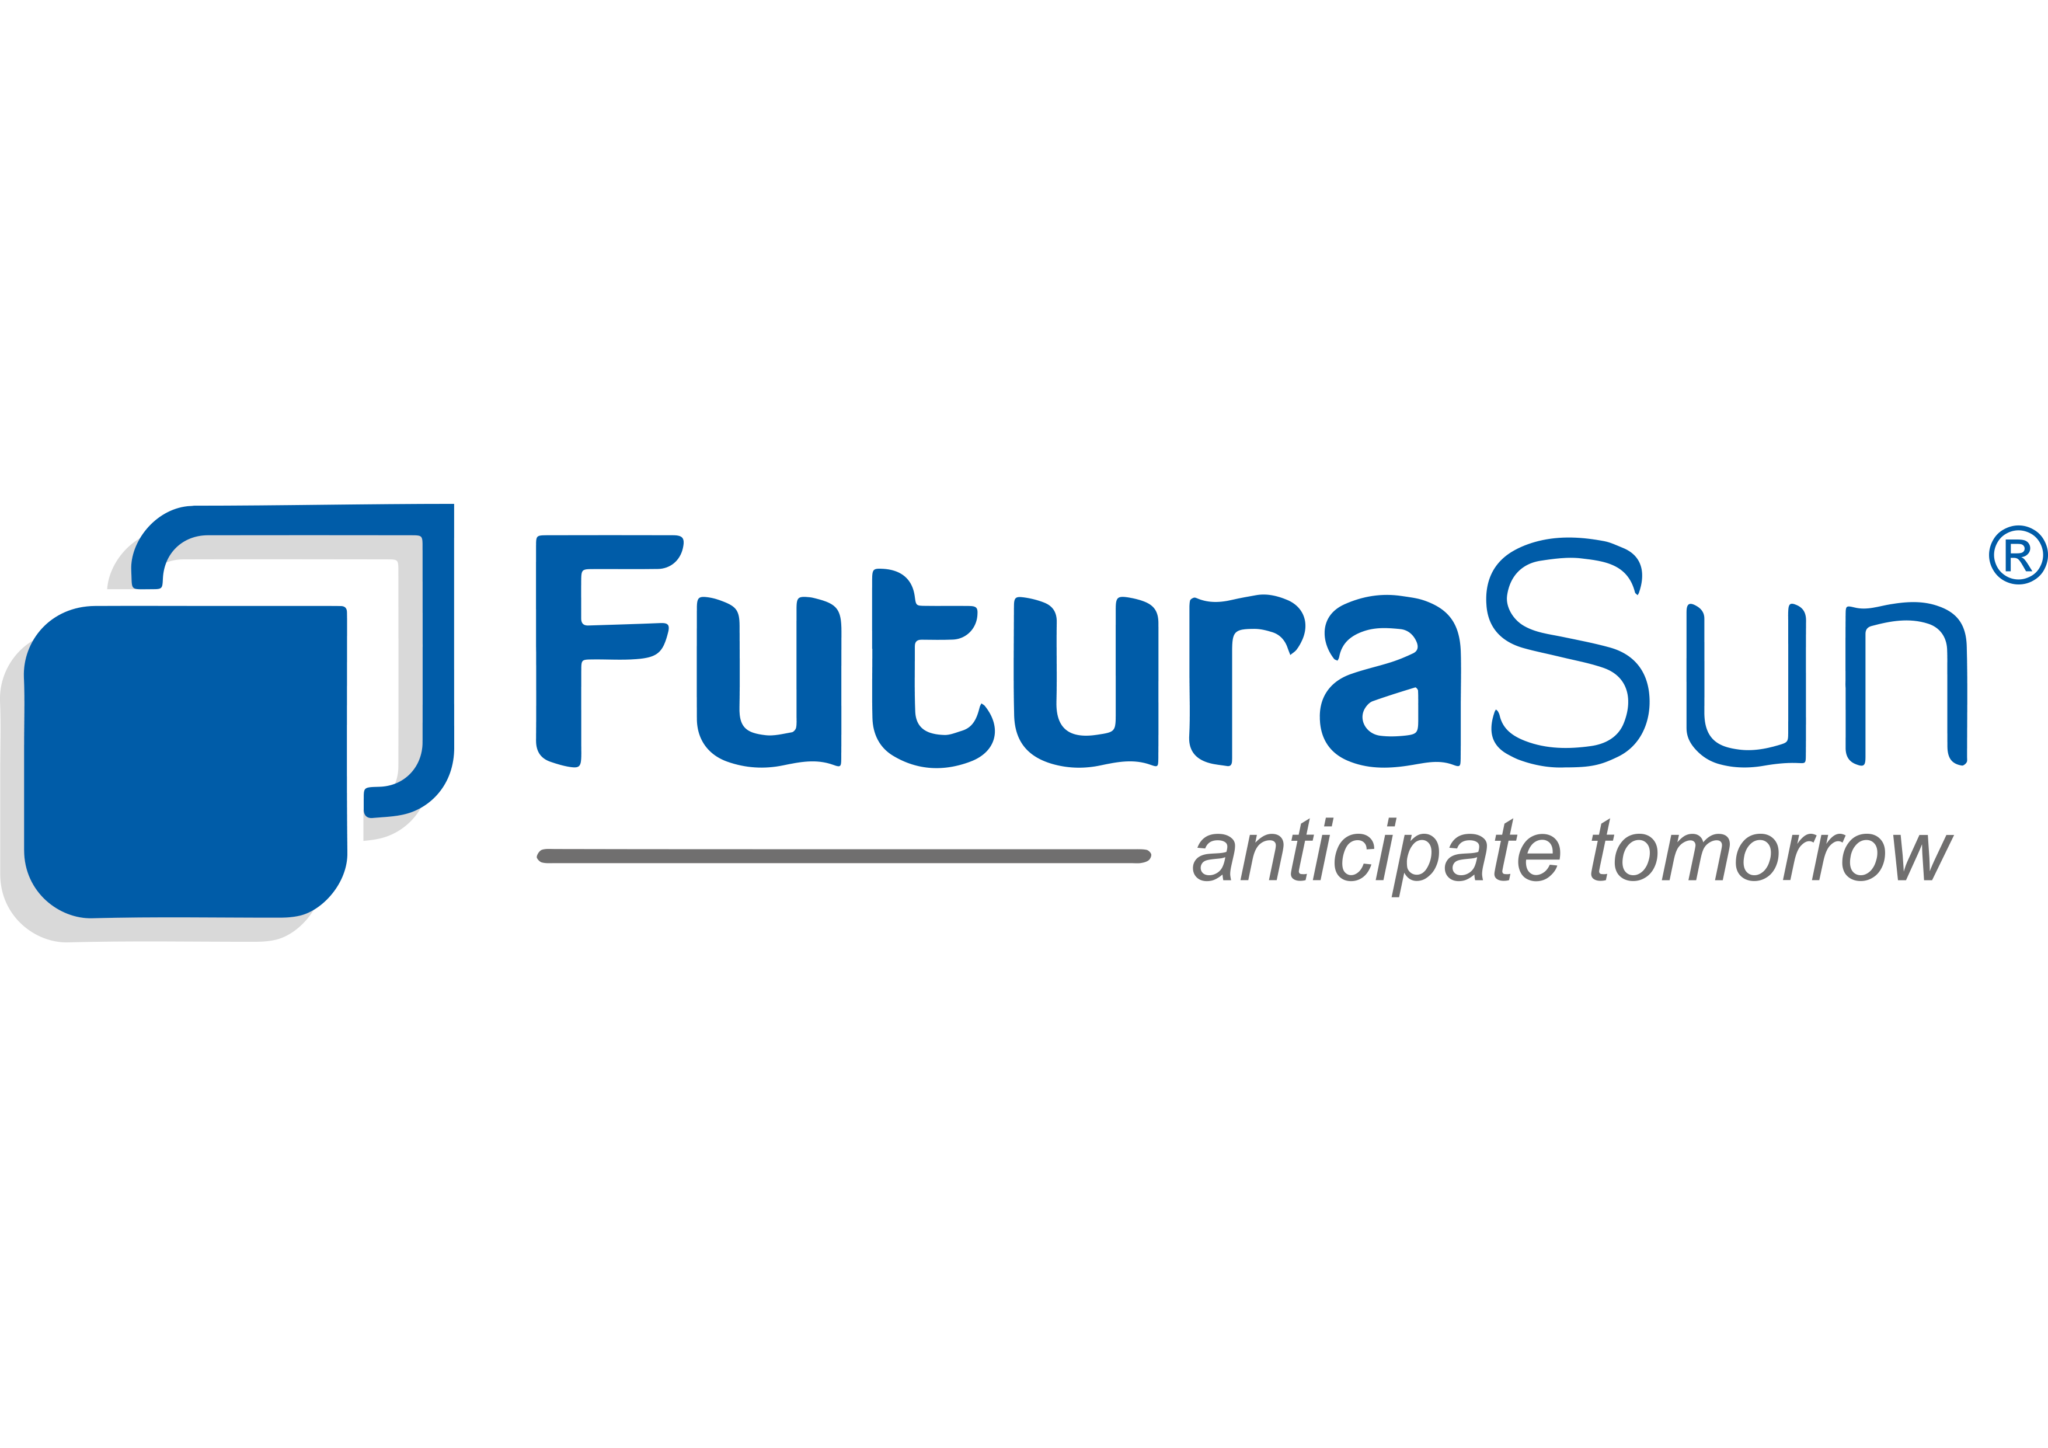 FuturaSun becomes a photovoltaic cell manufacturer, unveiling 10 GW industrial hub 0e598c07-9506-48b3-8cf0-4a99f89b3804?size=1